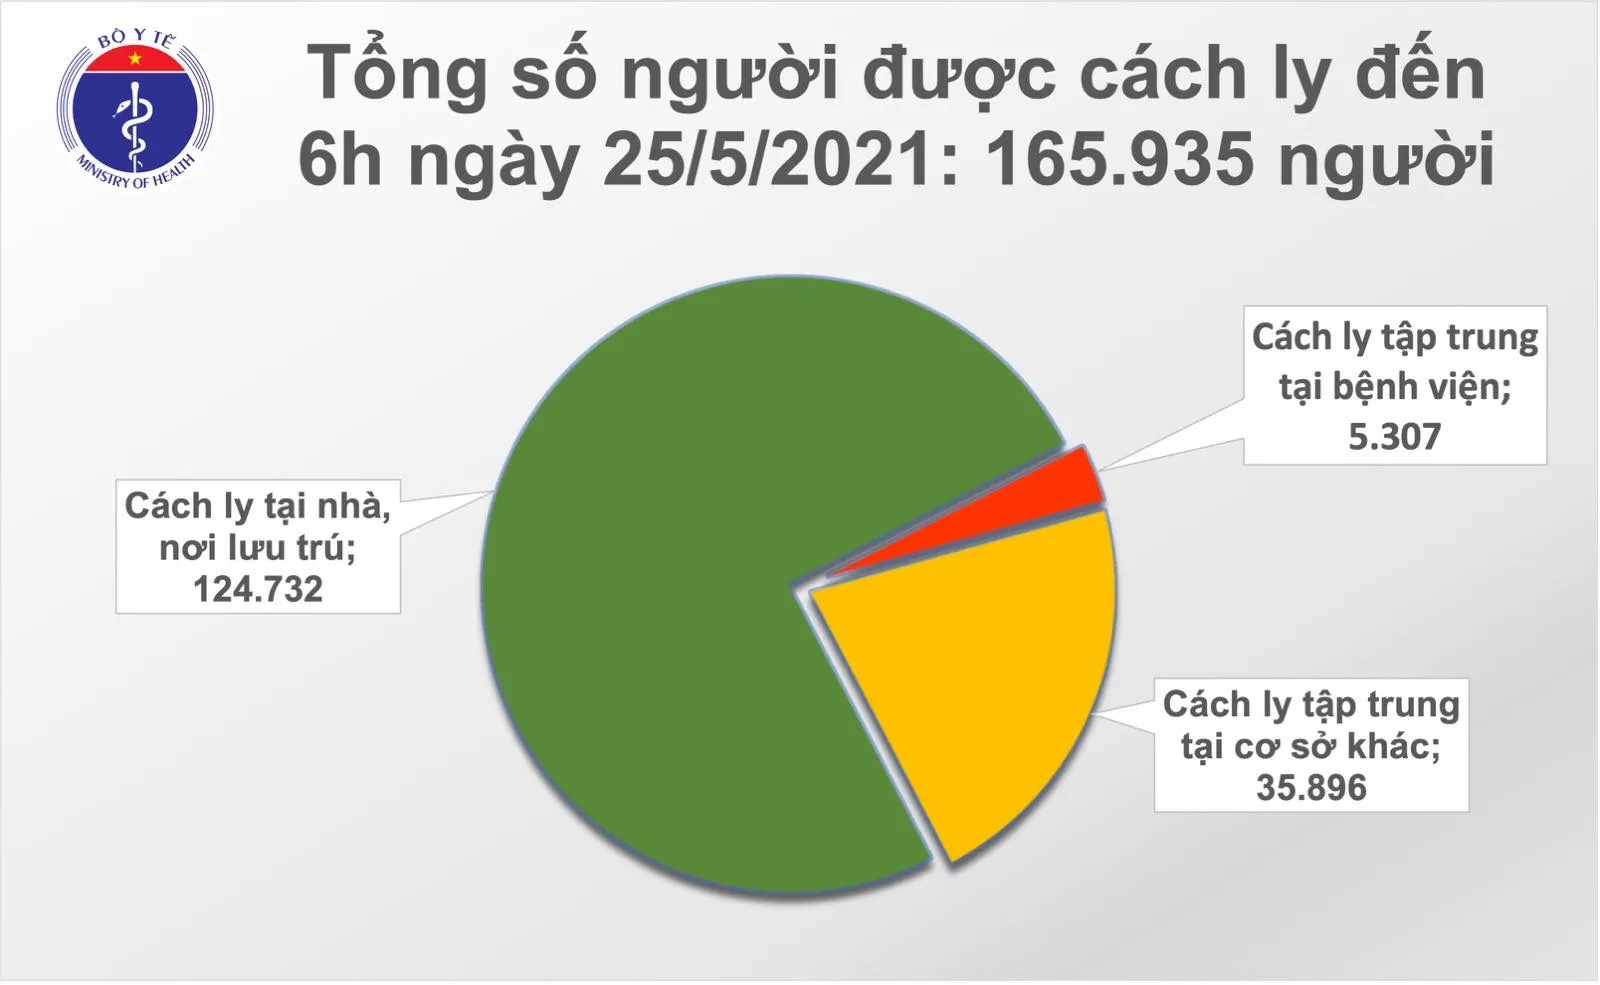 sang-25-5-them-57-ca-mac-moi-covid-19-trong-do-bac-giang-co-45-ca-voh.com.vn-anh1